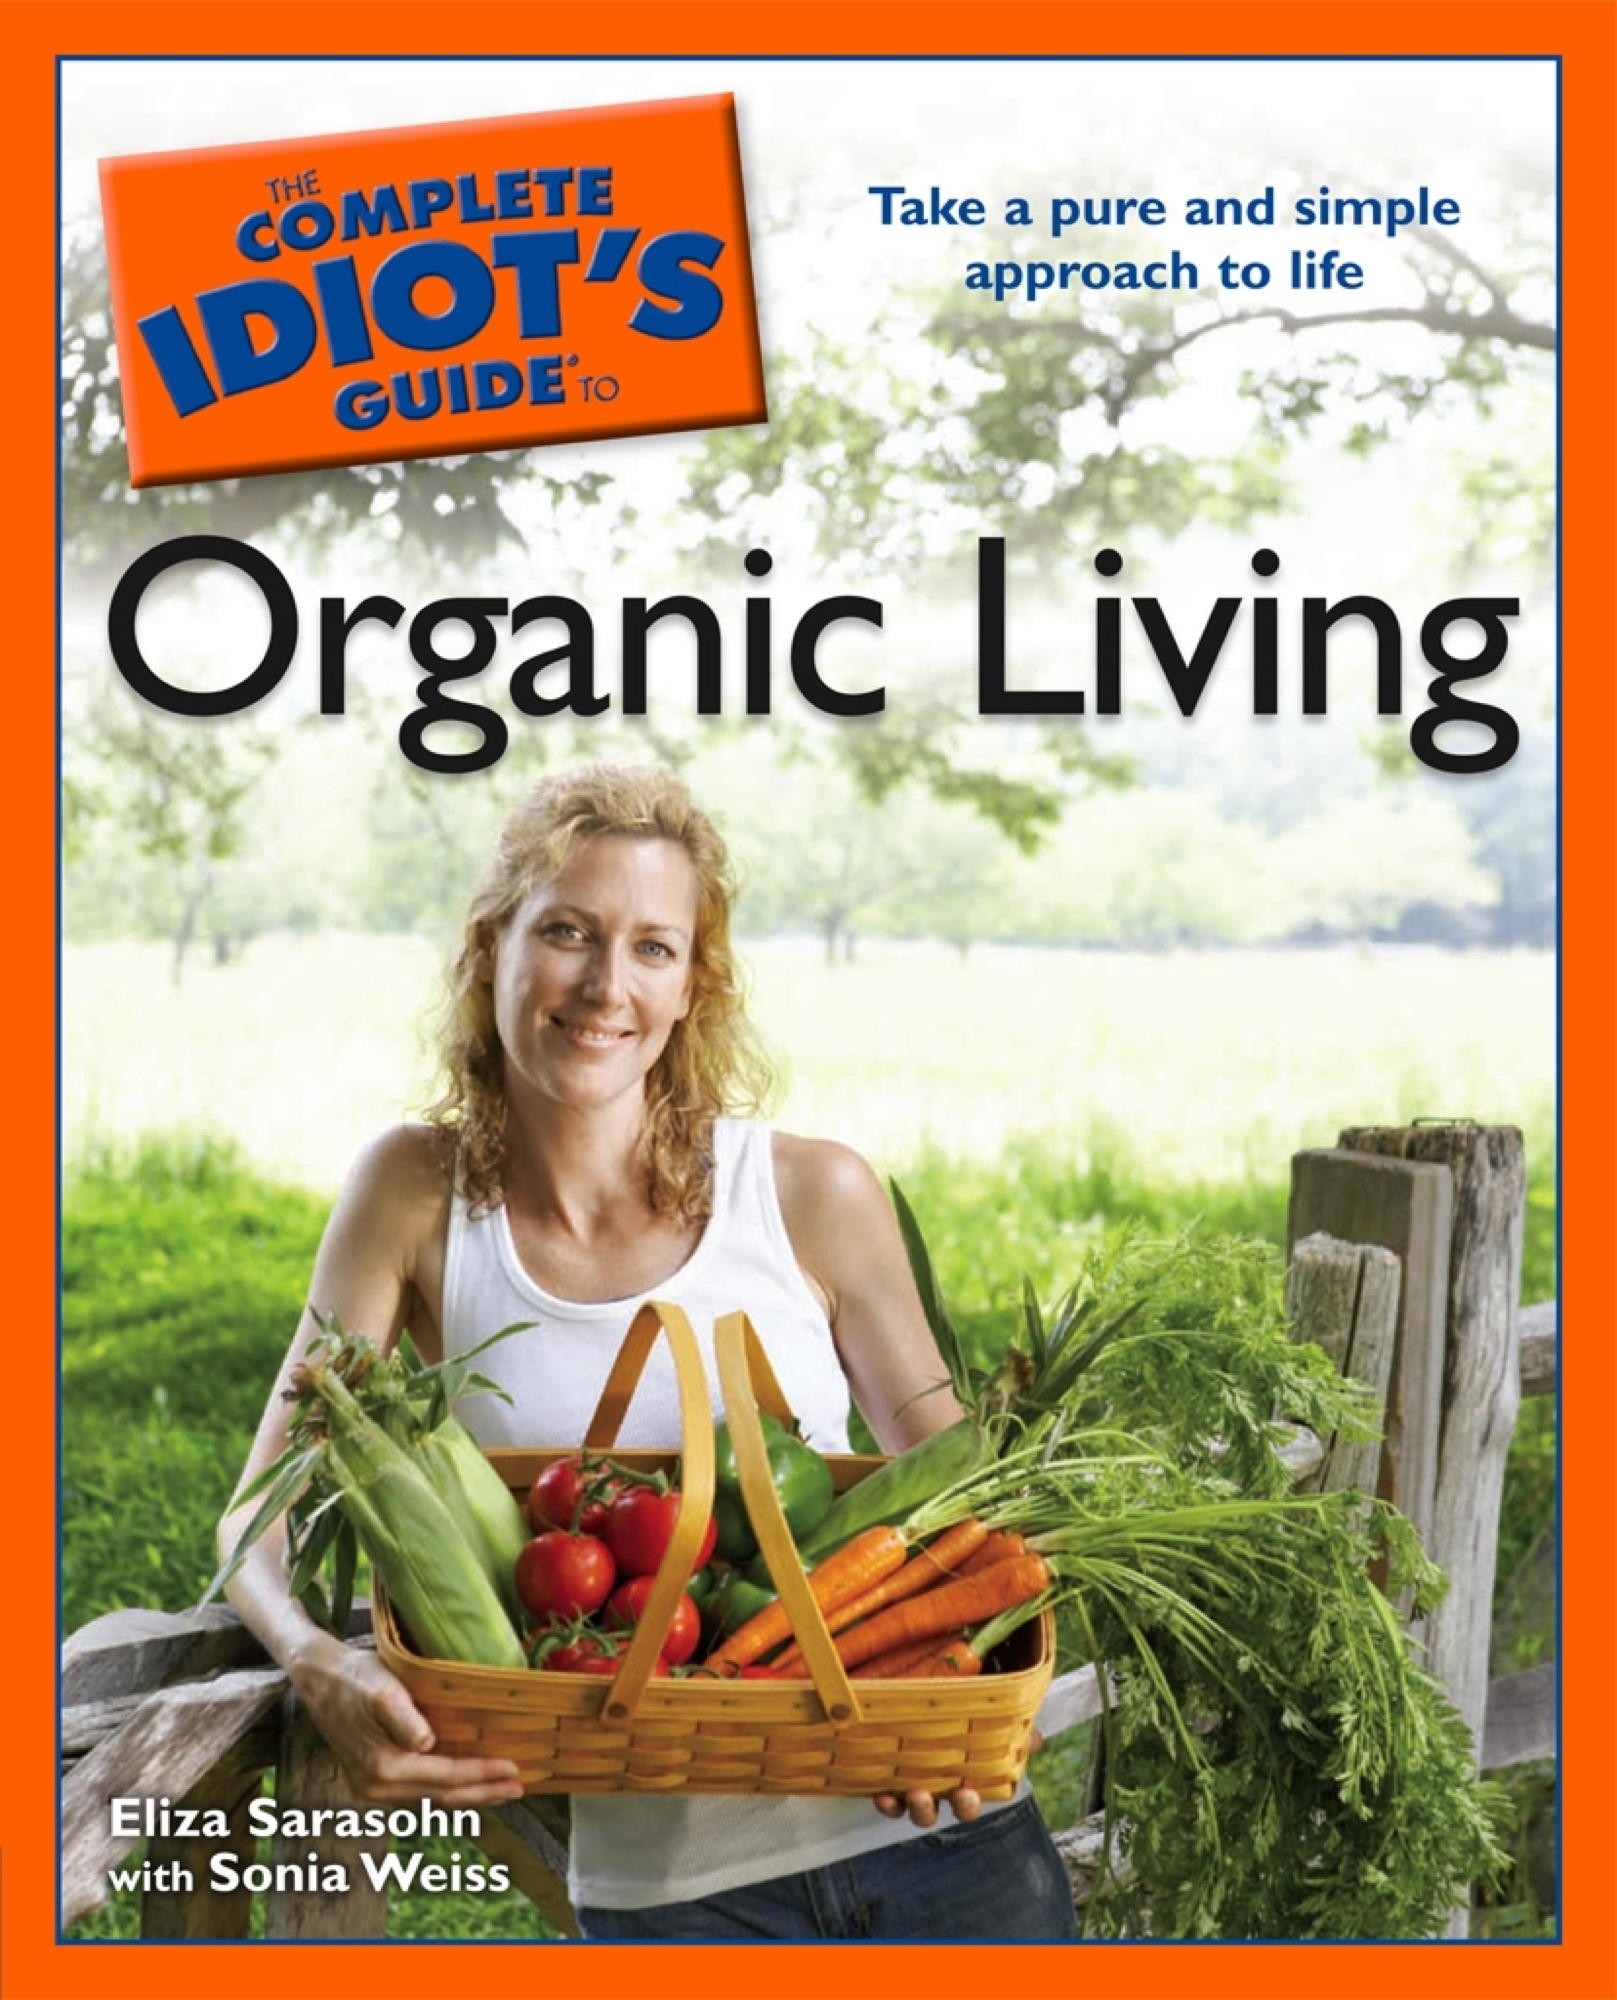 The Complete Idiot's Guide to Organic Living